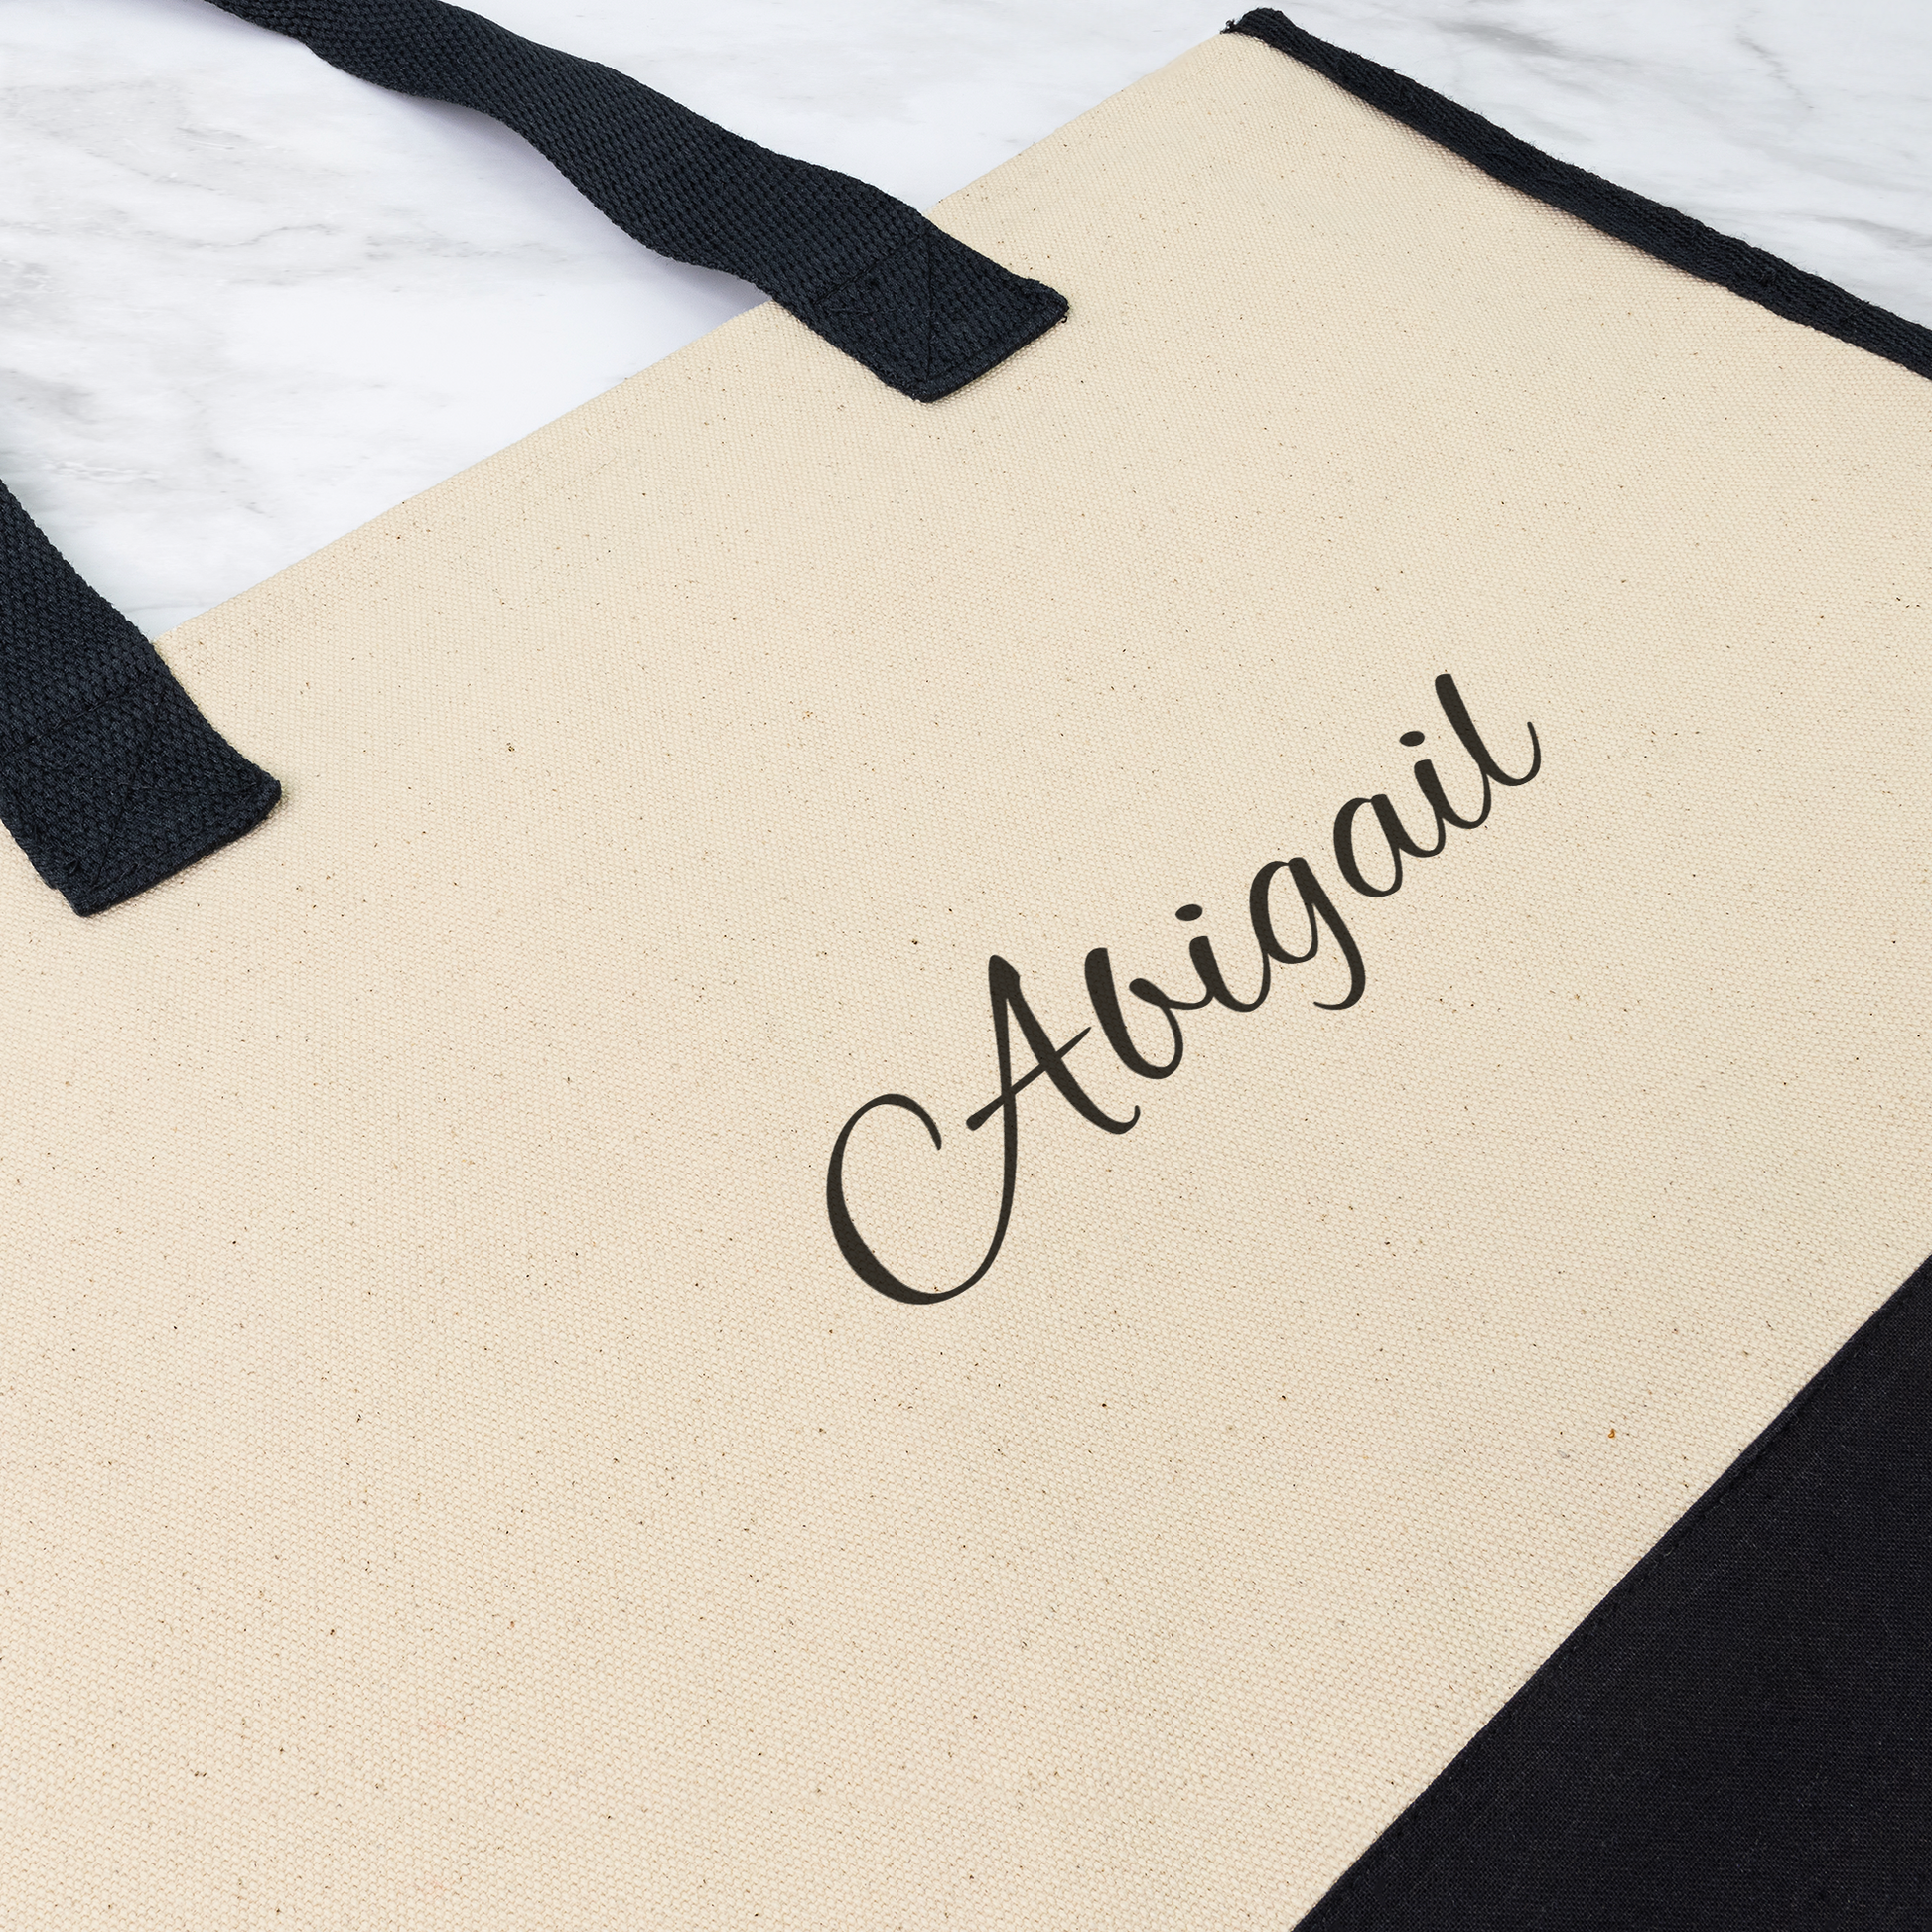 Get trendy with Personalized Premium Cotton Tote Bag -  available at Good Gift Company. Grab yours for $23 today!